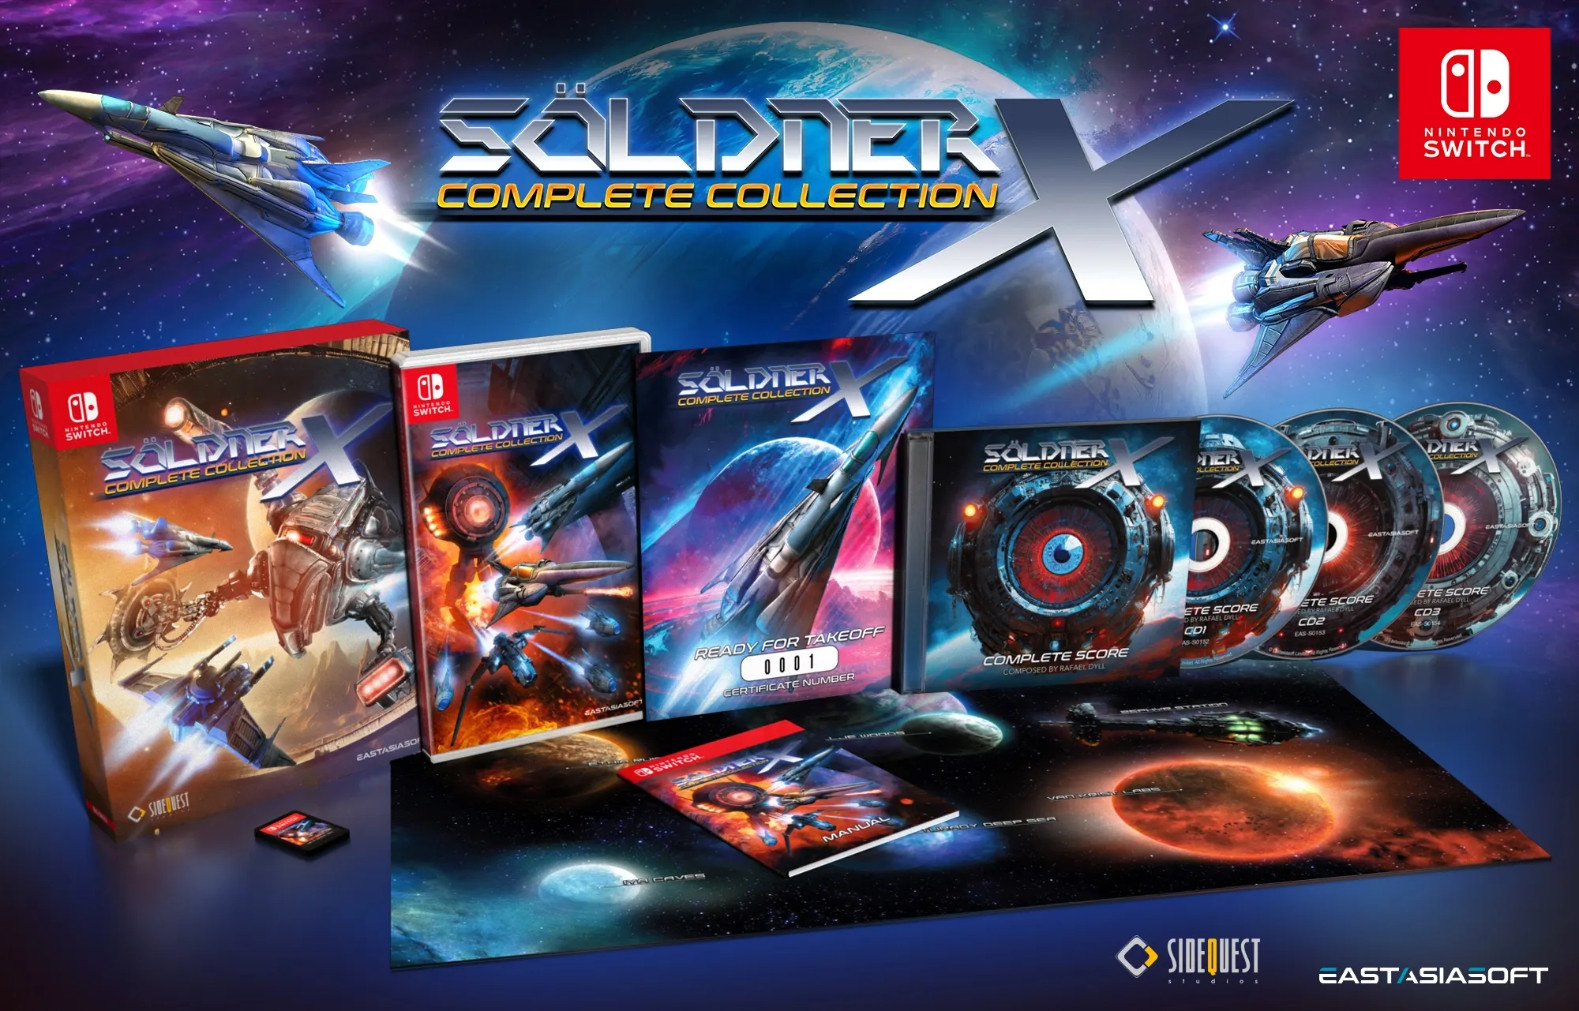 Soldner-X Complete Collection Limited Edition